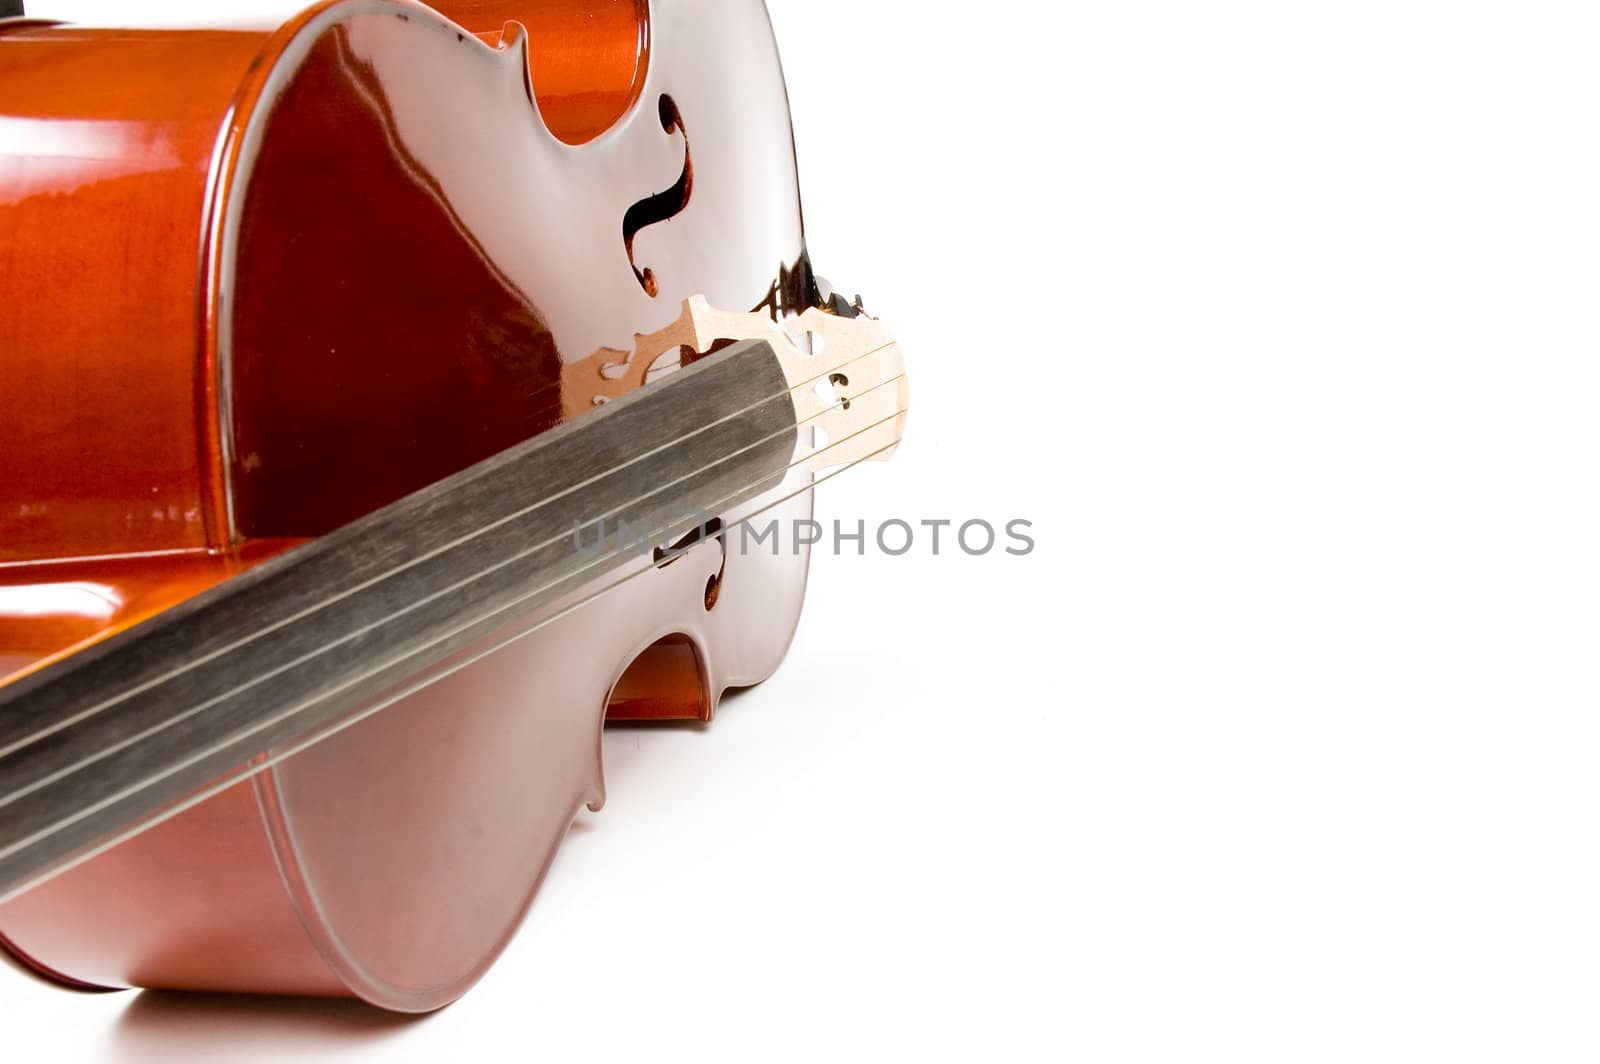 Cello, isolated on white with shadow by ladyminnie